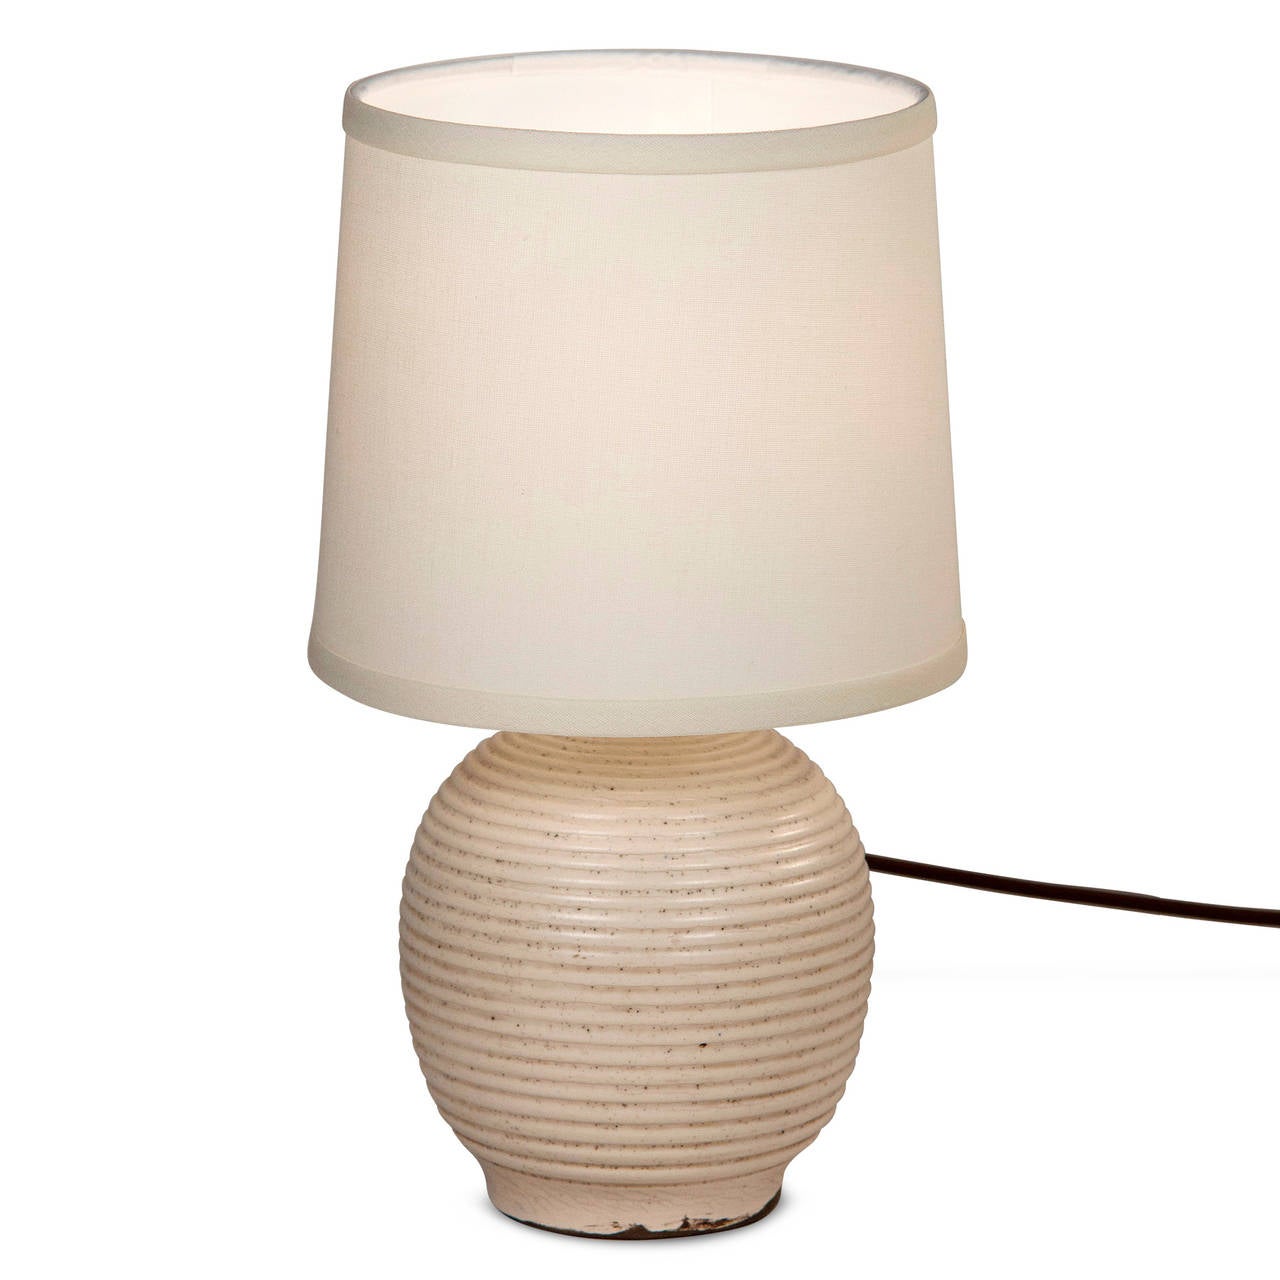 Glazed bulbous form ceramic table lamp, with circular grooves around the body, in custom silk shade, in pale off-white glaze, by Keramos for Sevres, French 1950s. Signed to underside. In custom silk shade. Overall height 14 in, diameter of base 6